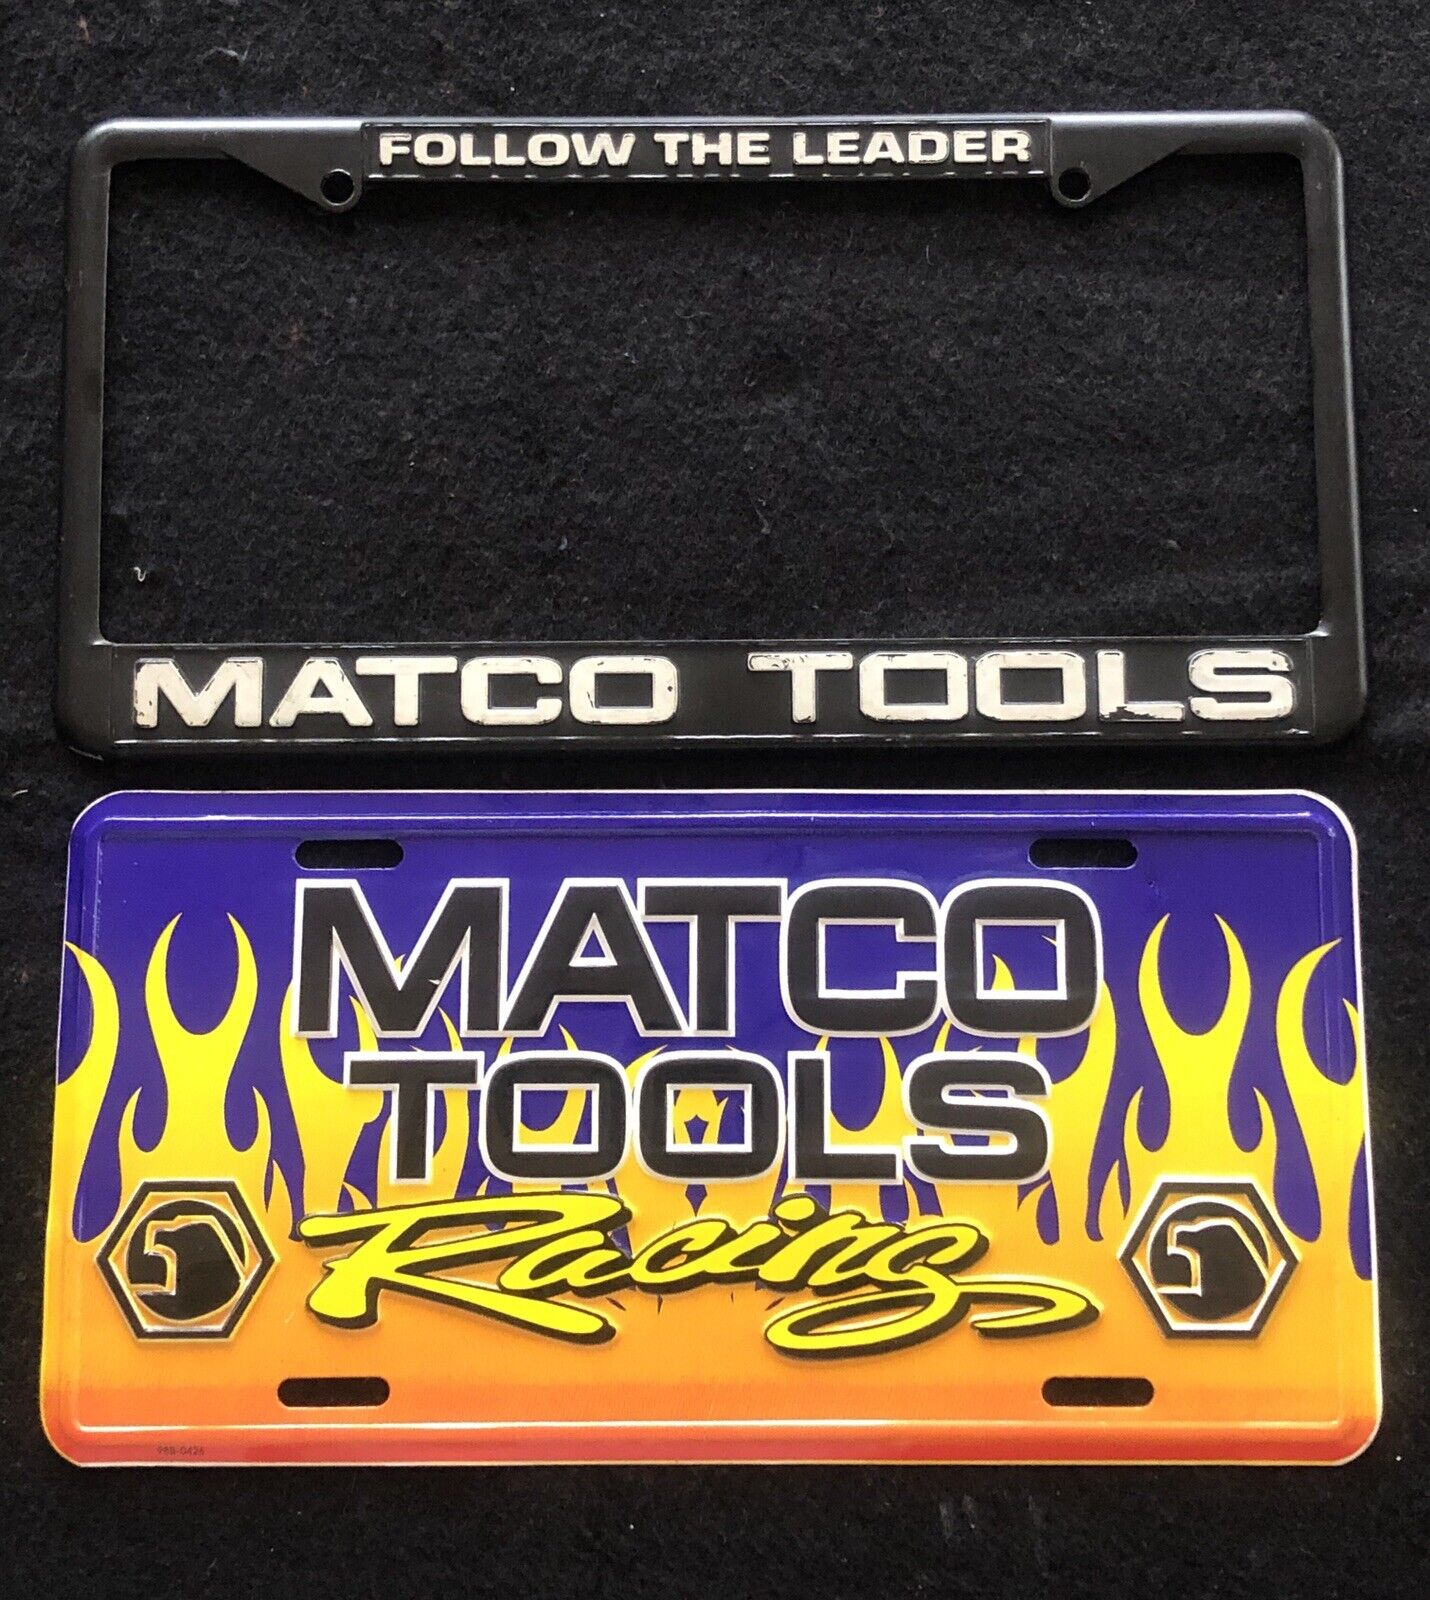 Matco Tools Racing Booster License Plate with Heavy Metal Frame